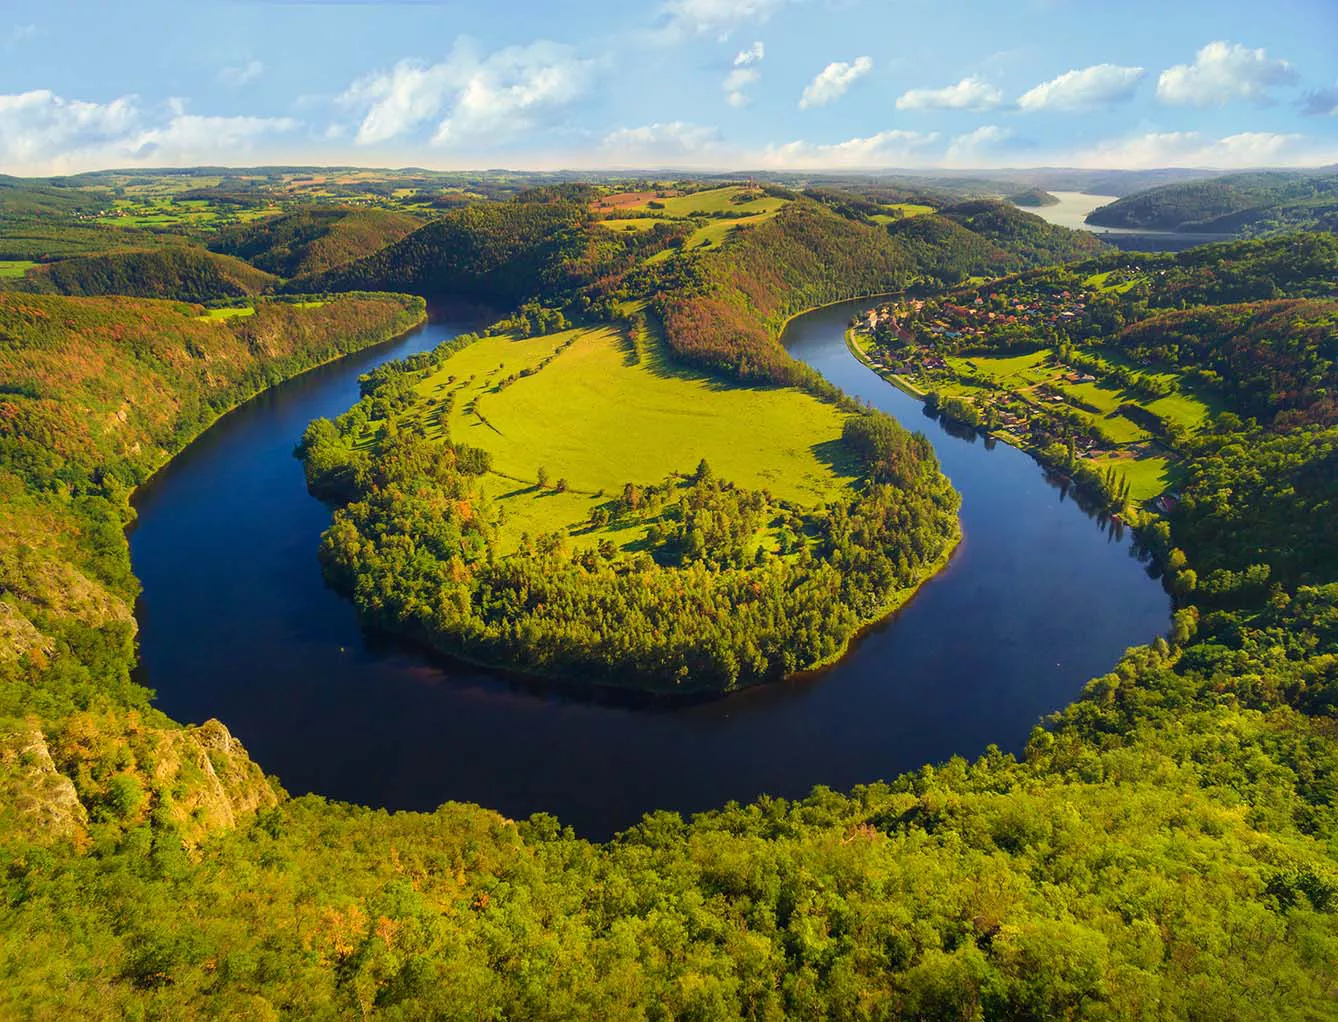 Horseshoe shape of Vltava River. Aerial view to amazing scenery close The Orlik reservoir. Most beautiful landscape in Czech Republic, Central Europe